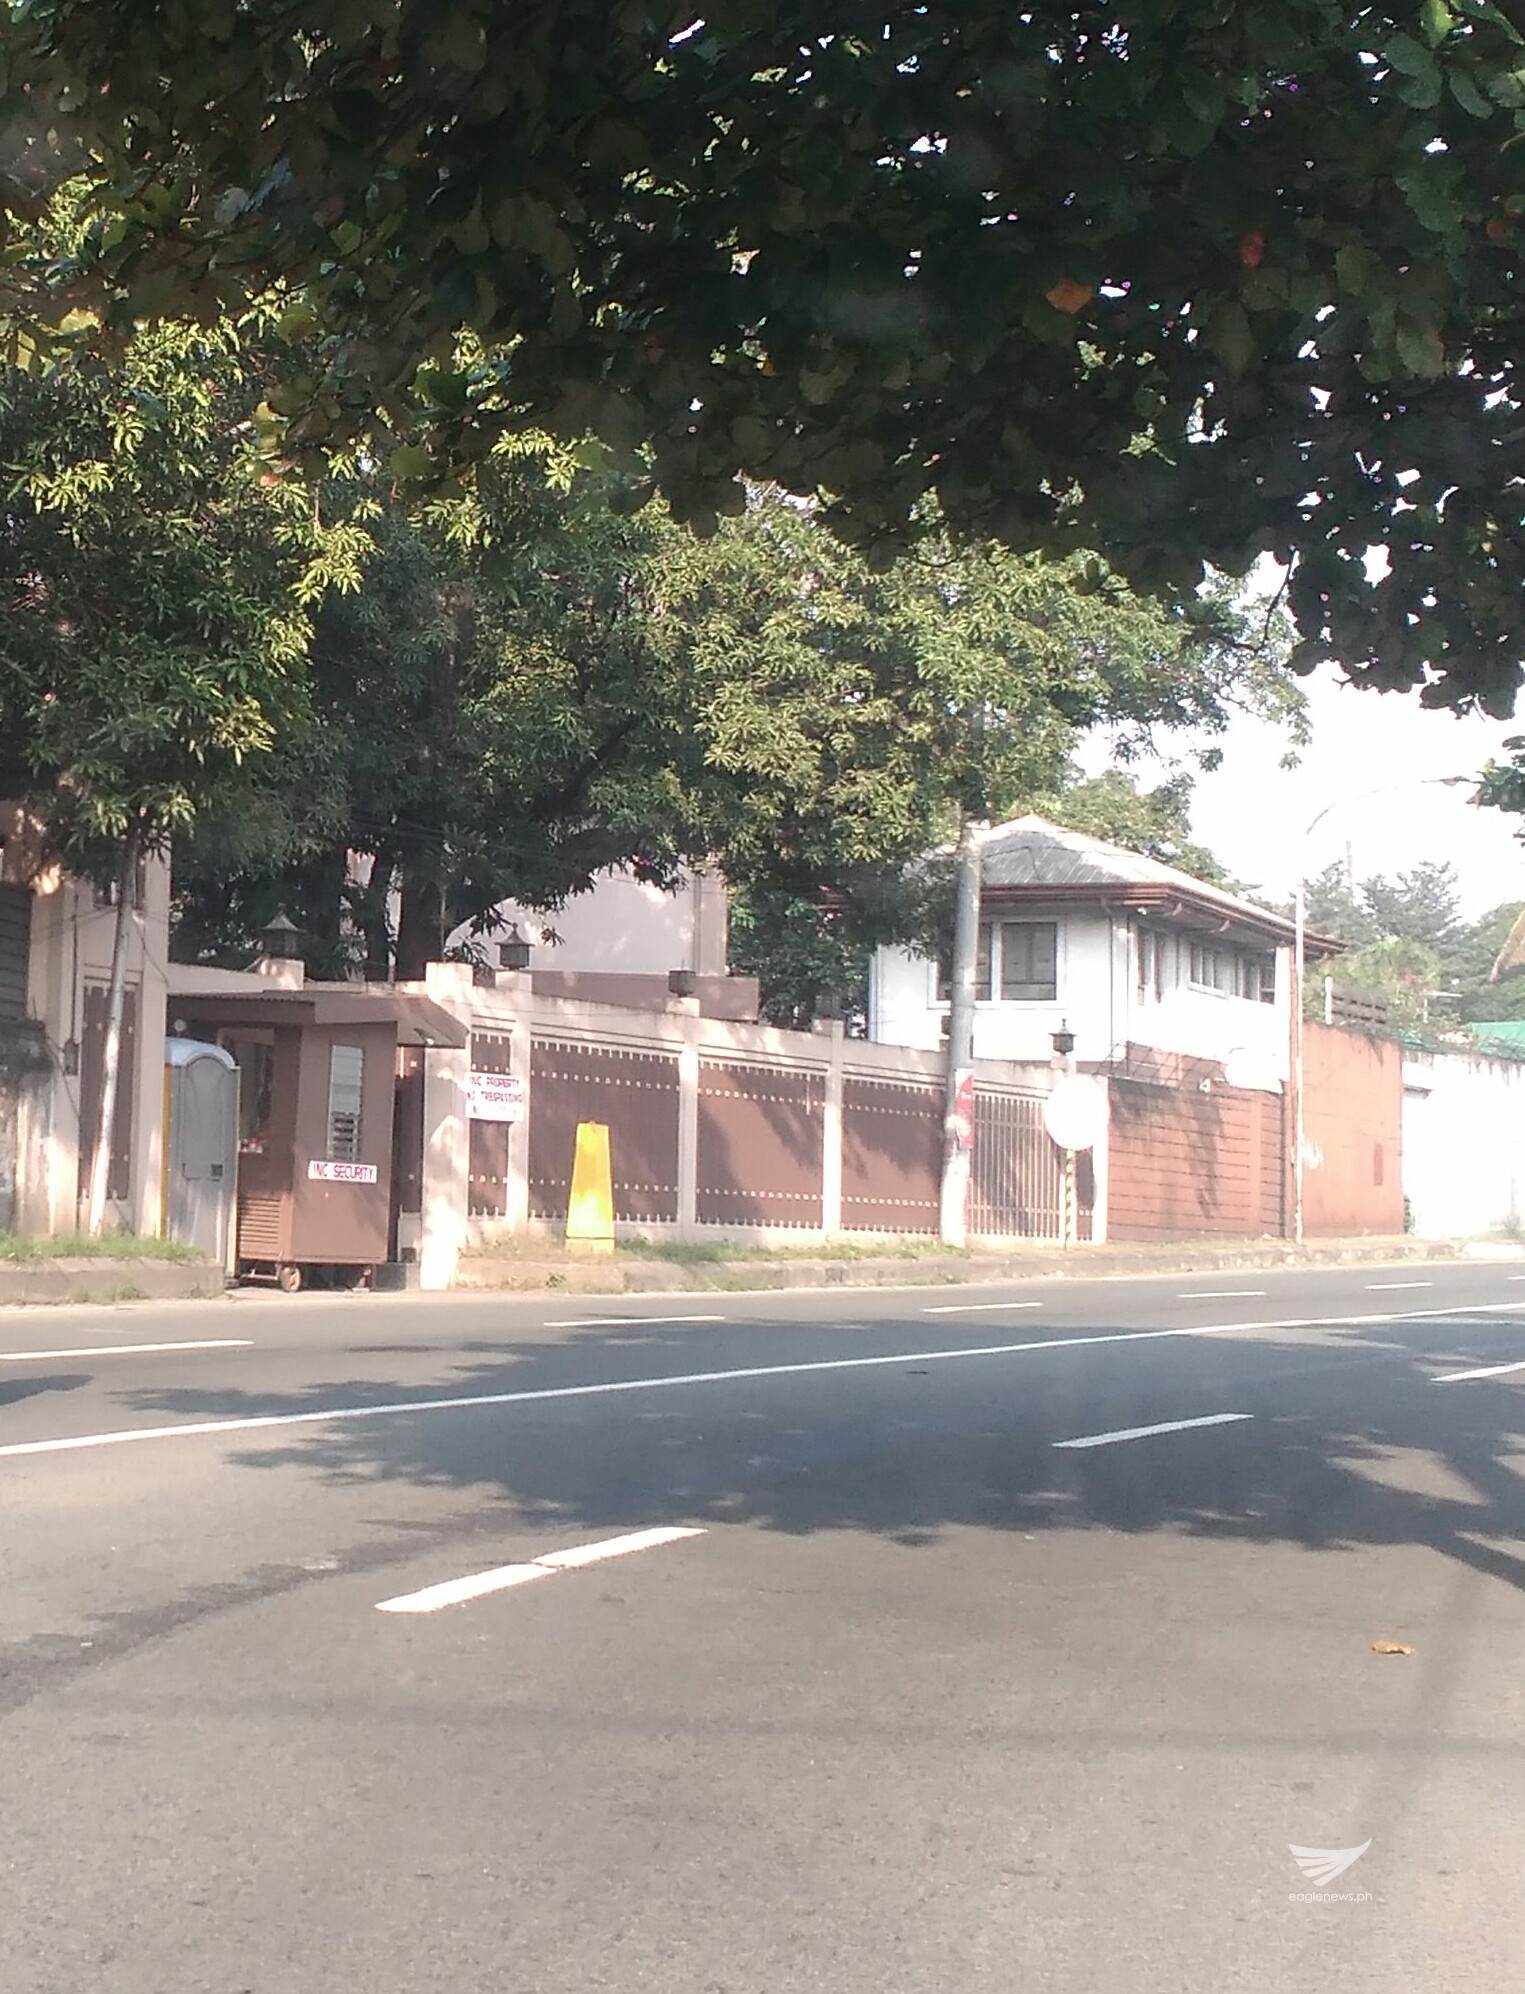 The Iglesia Ni Cristo property at no. 36 Tandang Sora Avenue in Quezon City. A Manila metropolitan trial court has ordered the illegal occupants of the place to immediately vacate the premises of this INC property. (Eagle News Service)